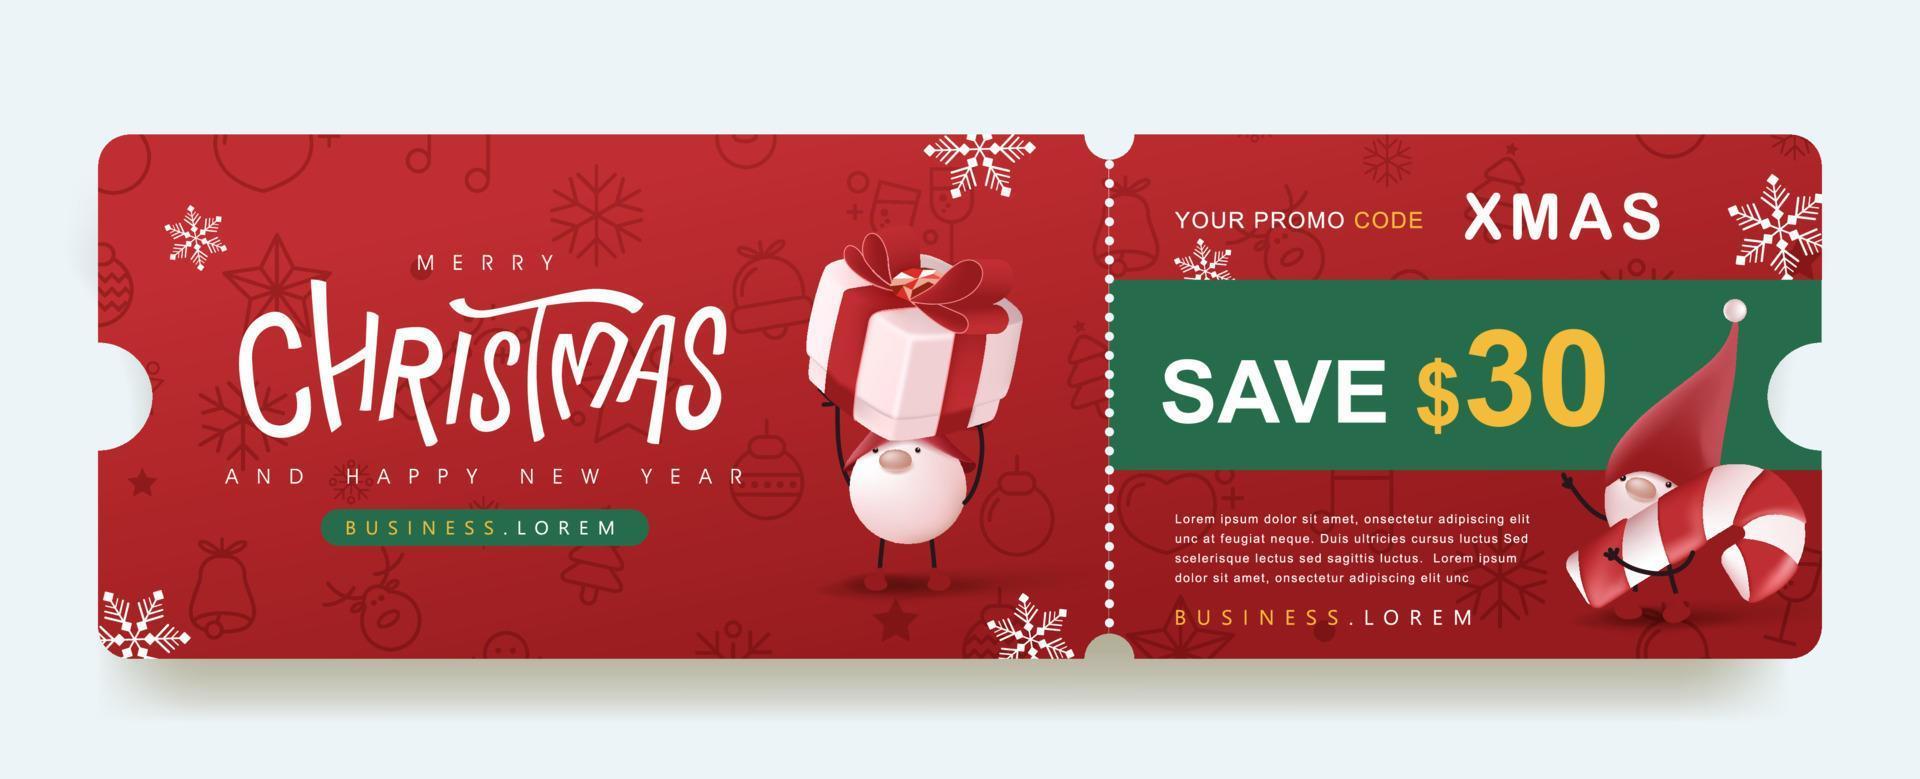 Merry Christmas  Gift promotion Coupon banner with cute gnome and festive decoration vector